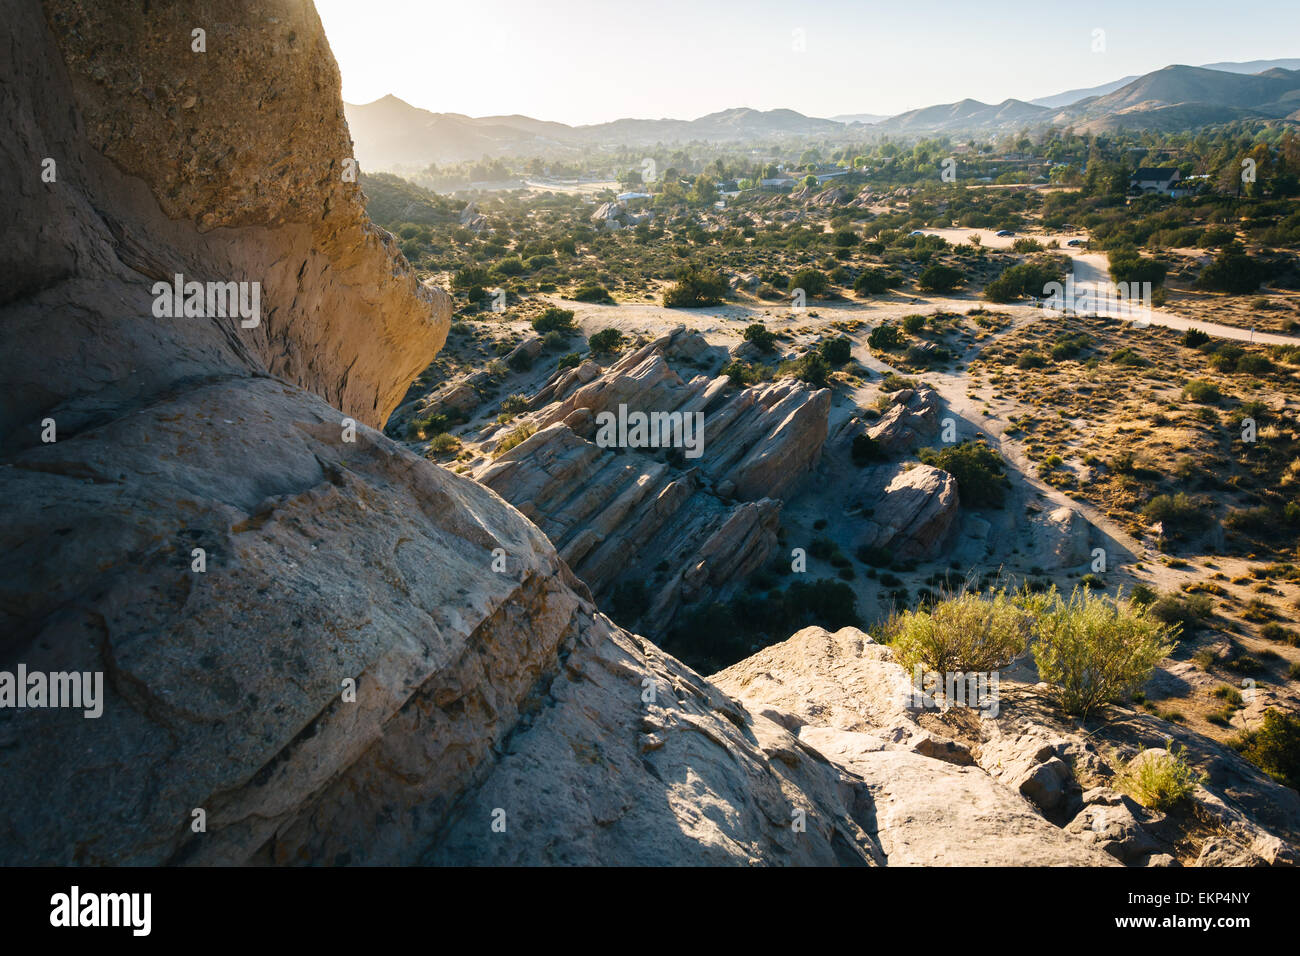 Rocks and view of Vasquez Rocks County Park, in Agua Dulce, California. Stock Photo